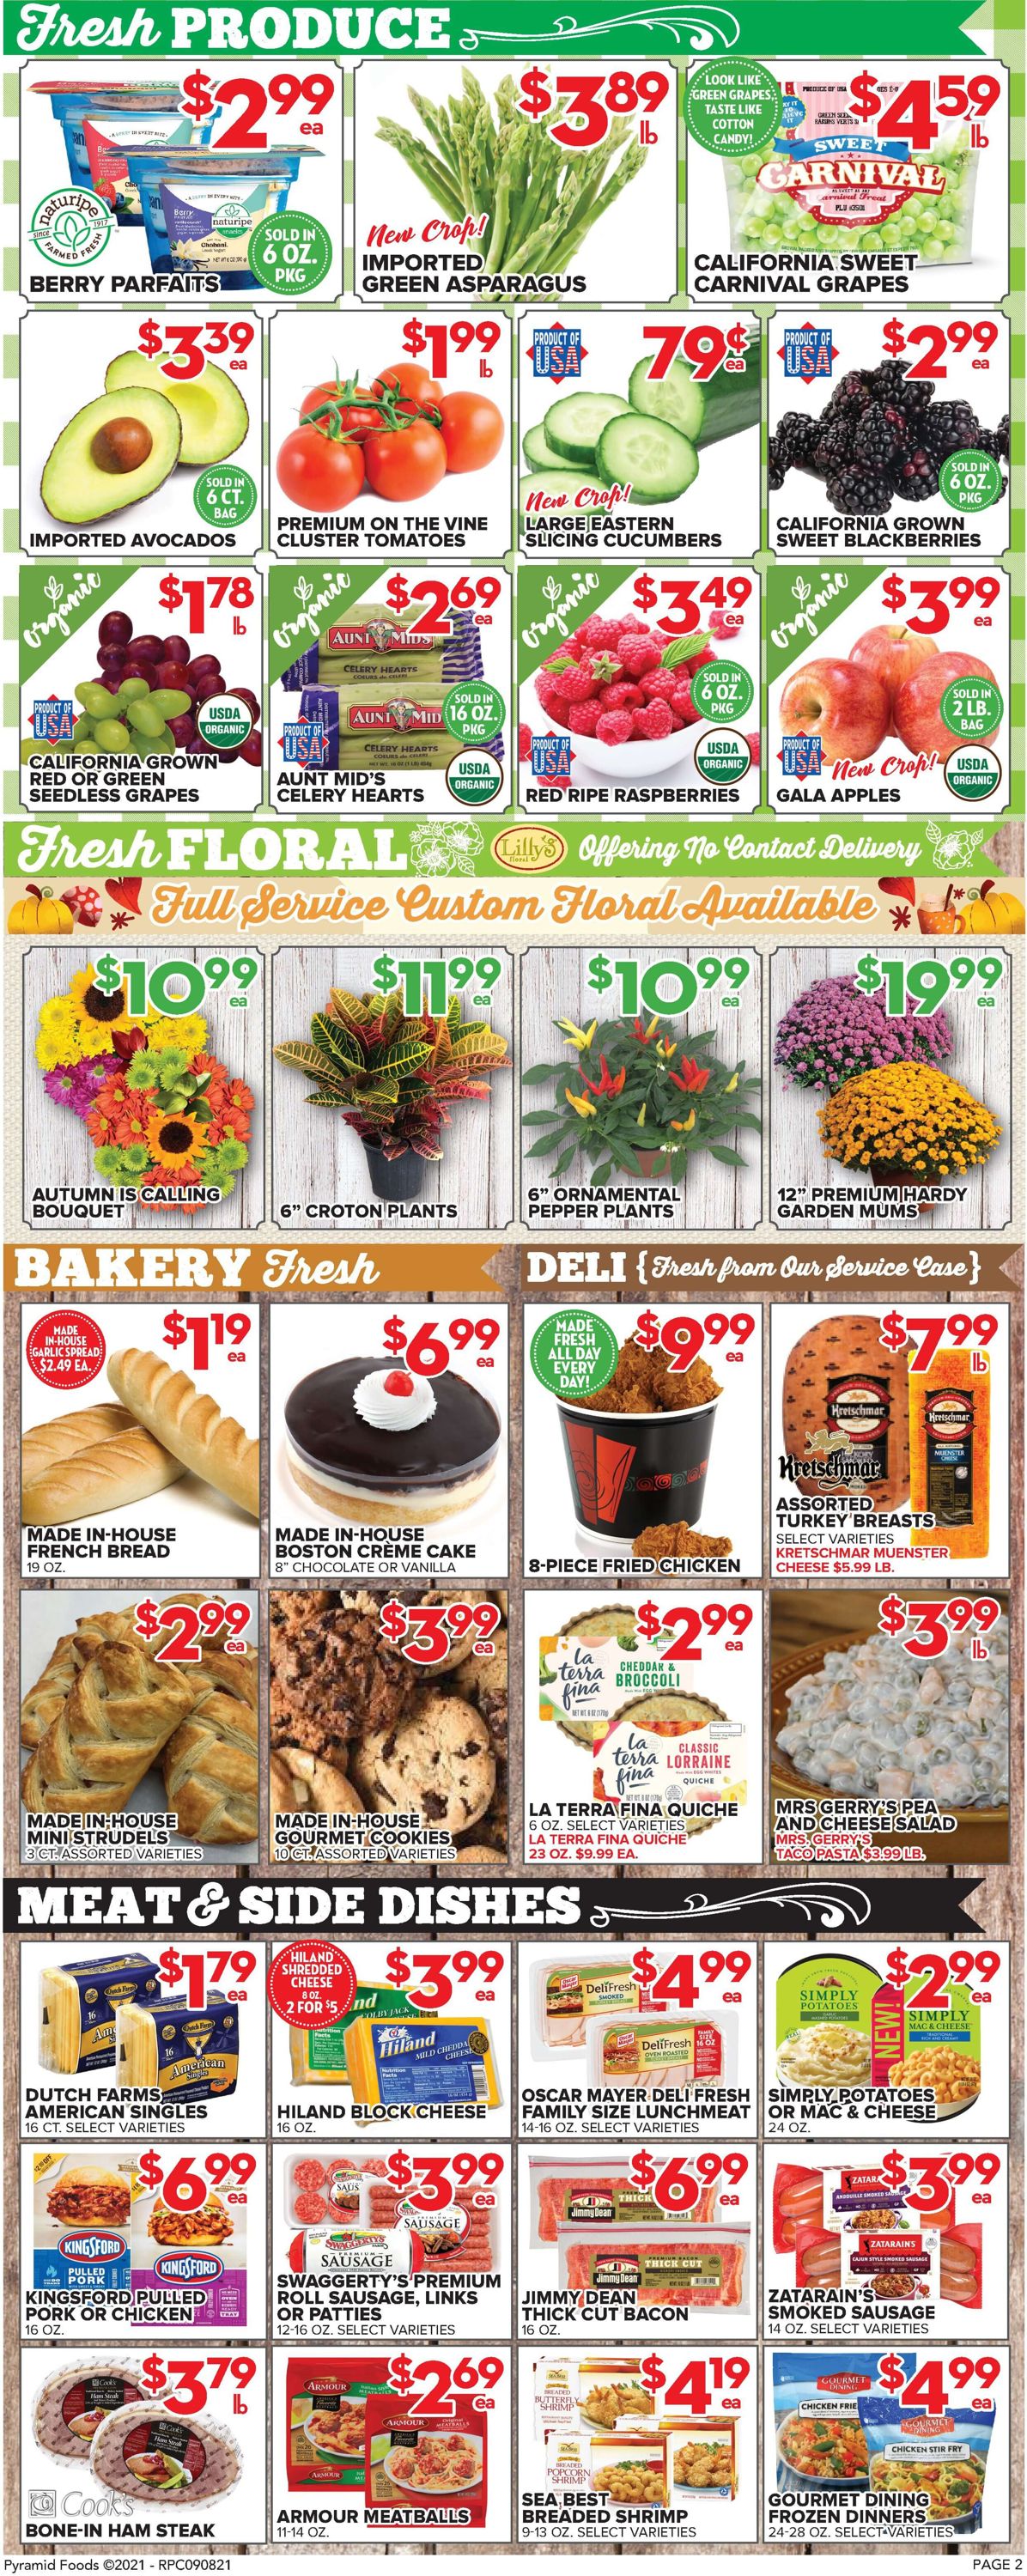 Price Cutter Weekly Ad Circular - valid 09/08-09/14/2021 (Page 2)